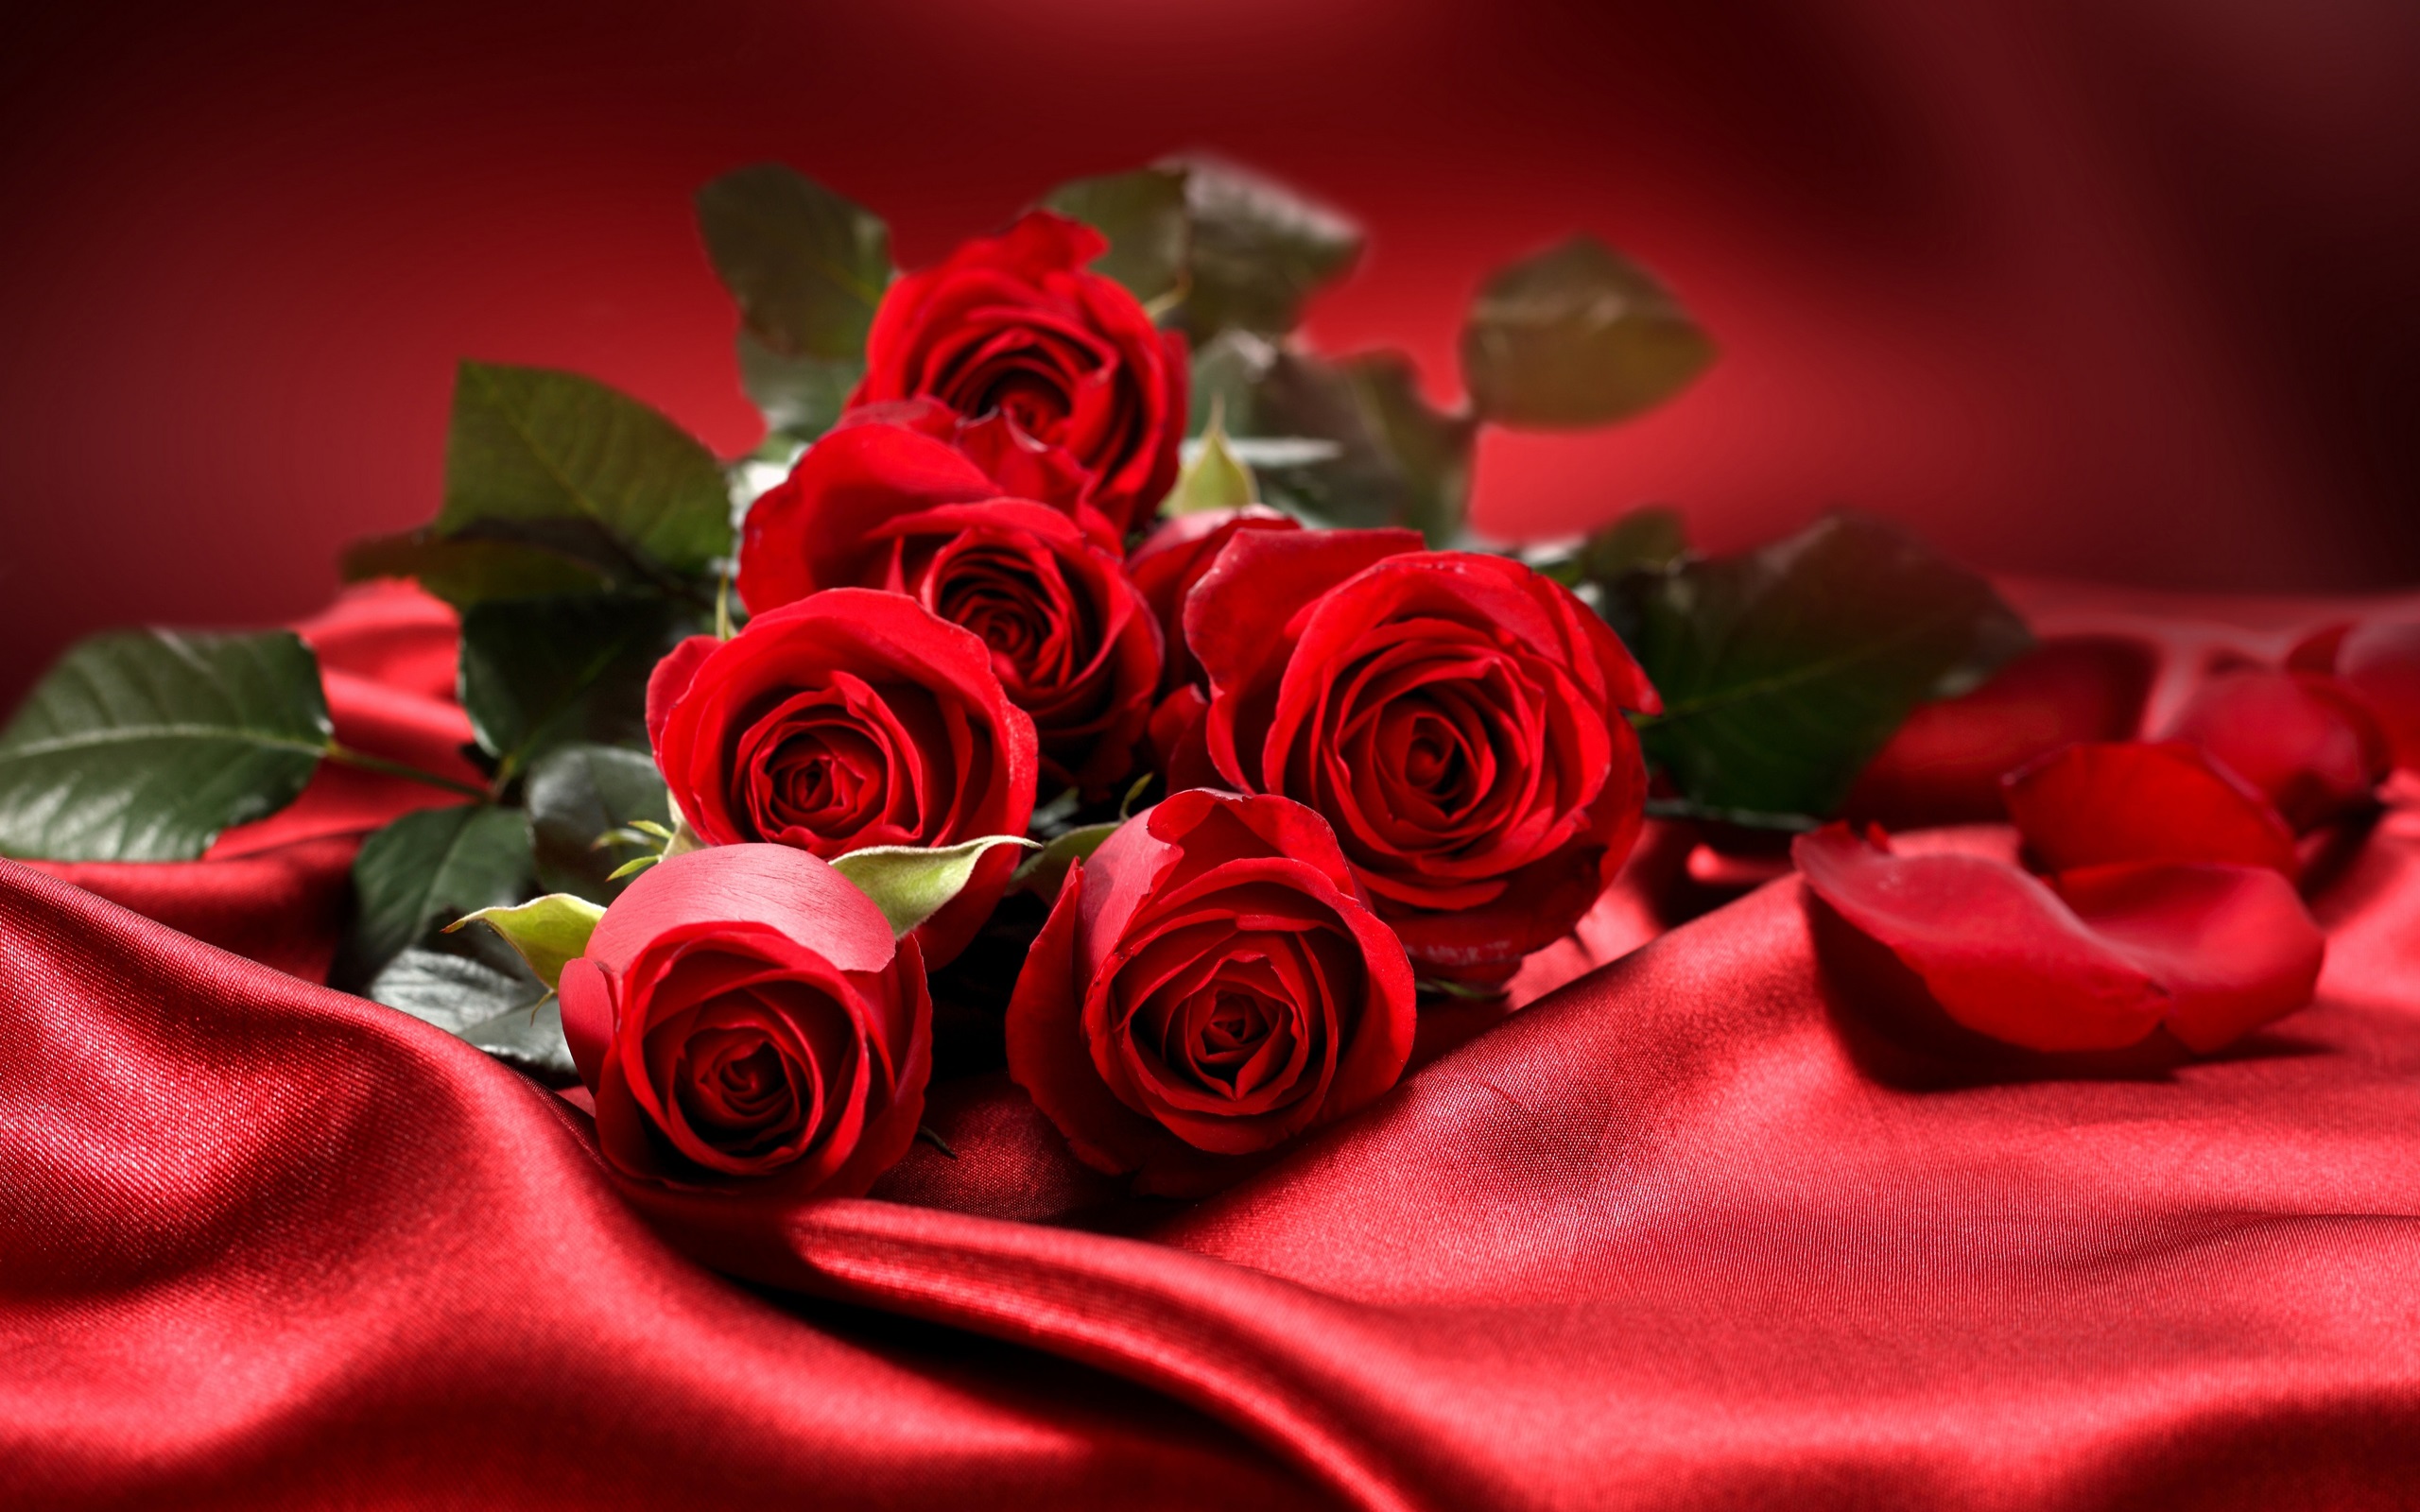 Bouquet Flowers Red Roses Love Valentine S Day 2560x1600 : Wallpapers13.com2560 x 1600